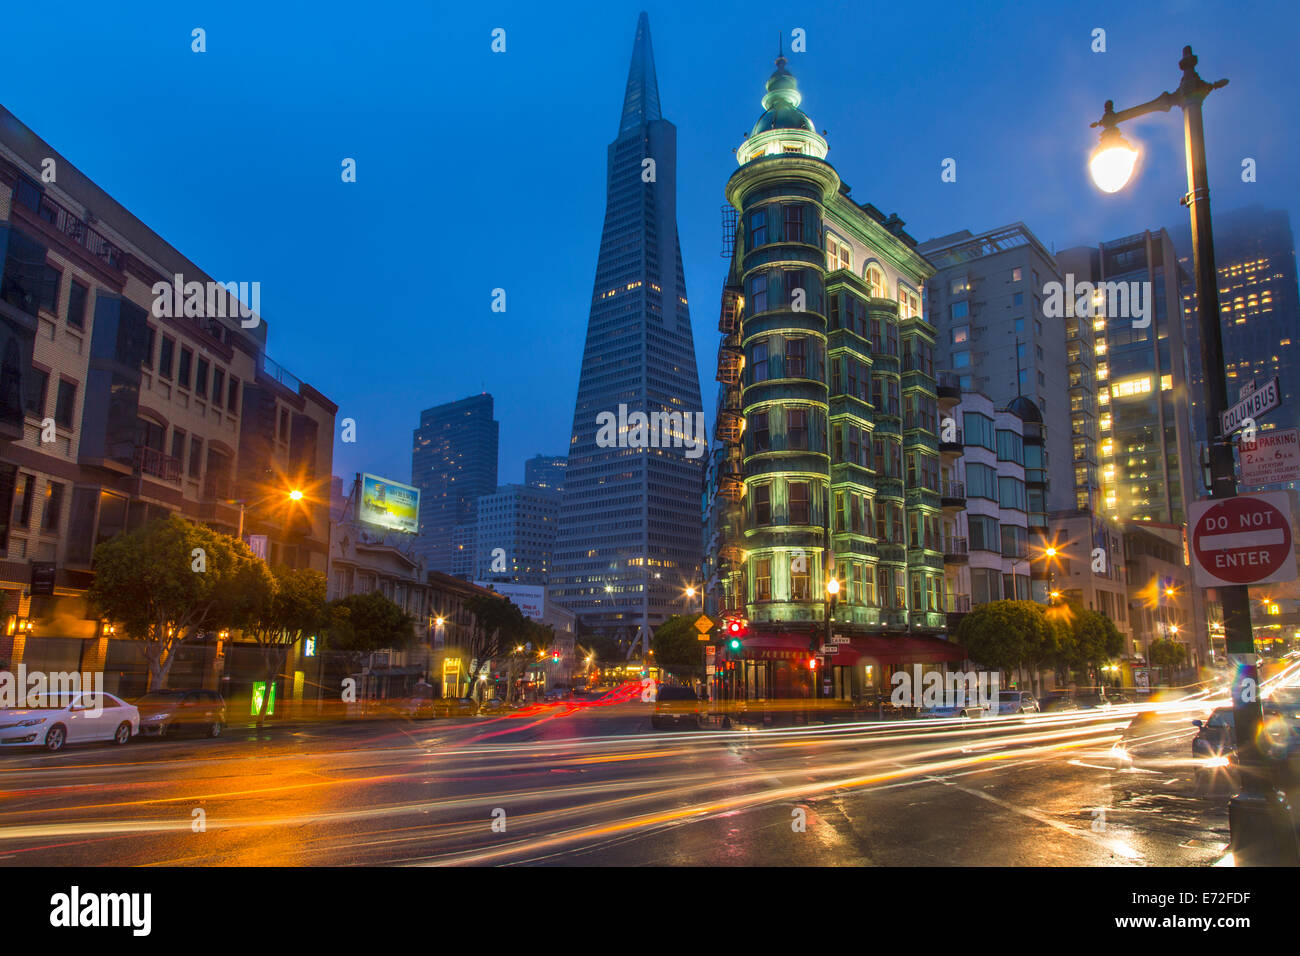 The TransAmerica and Coppola Sentinel Building on a rainy evening in downtown San Francisco, California, USA. Stock Photo